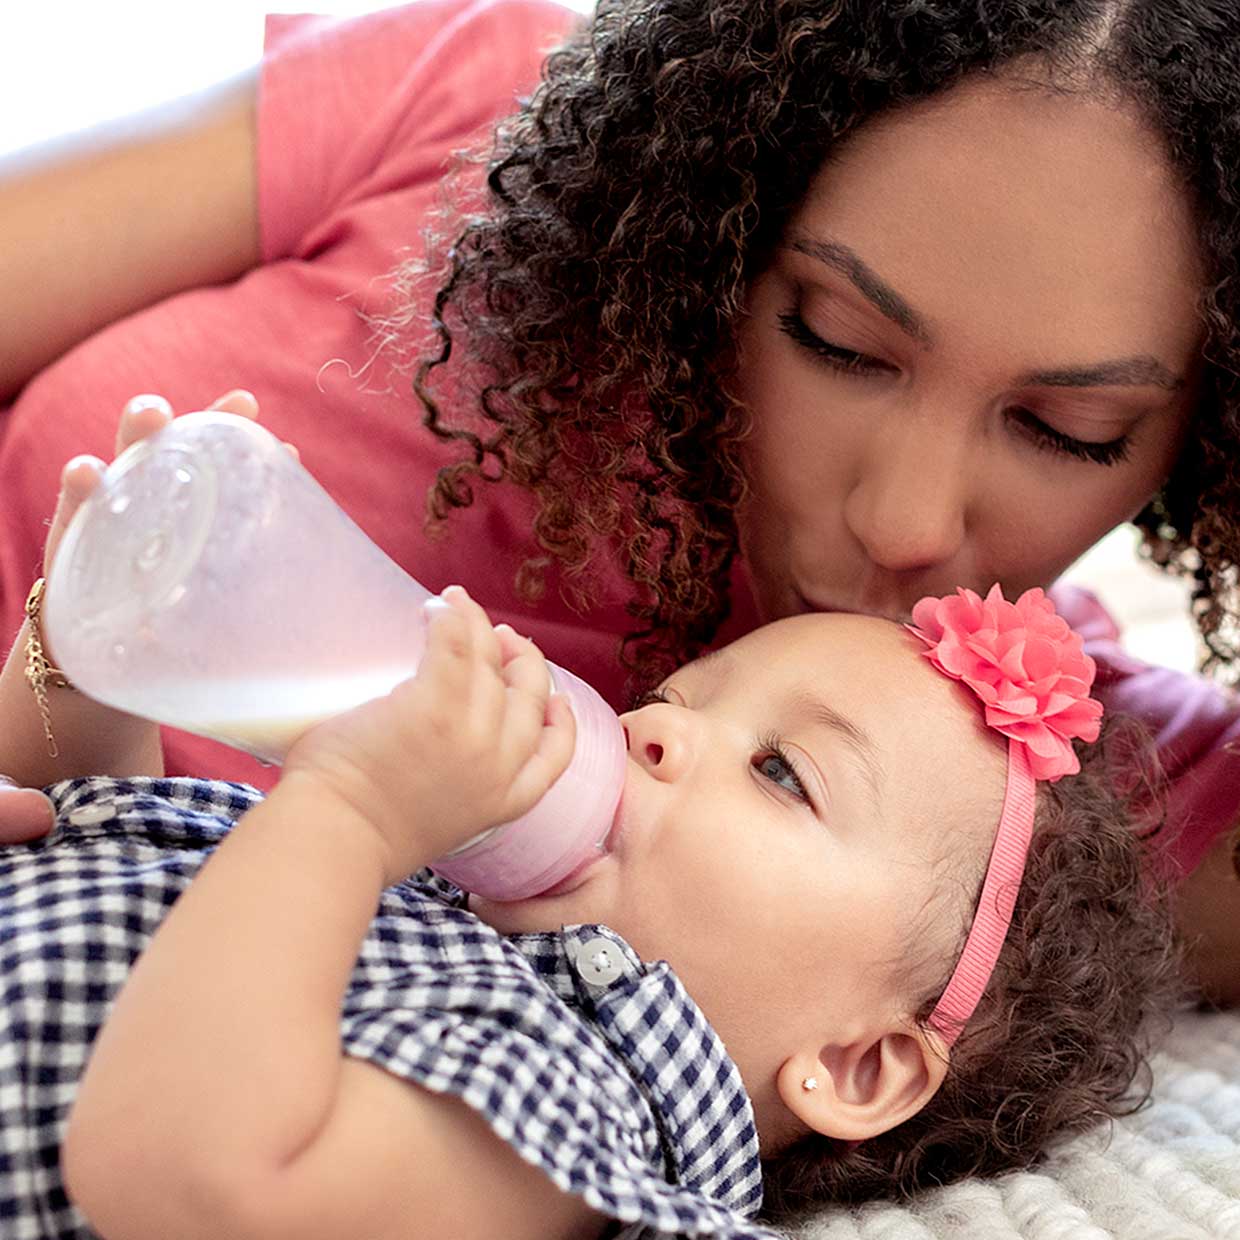 When Do Babies Hold Their Own Bottle or Cup?